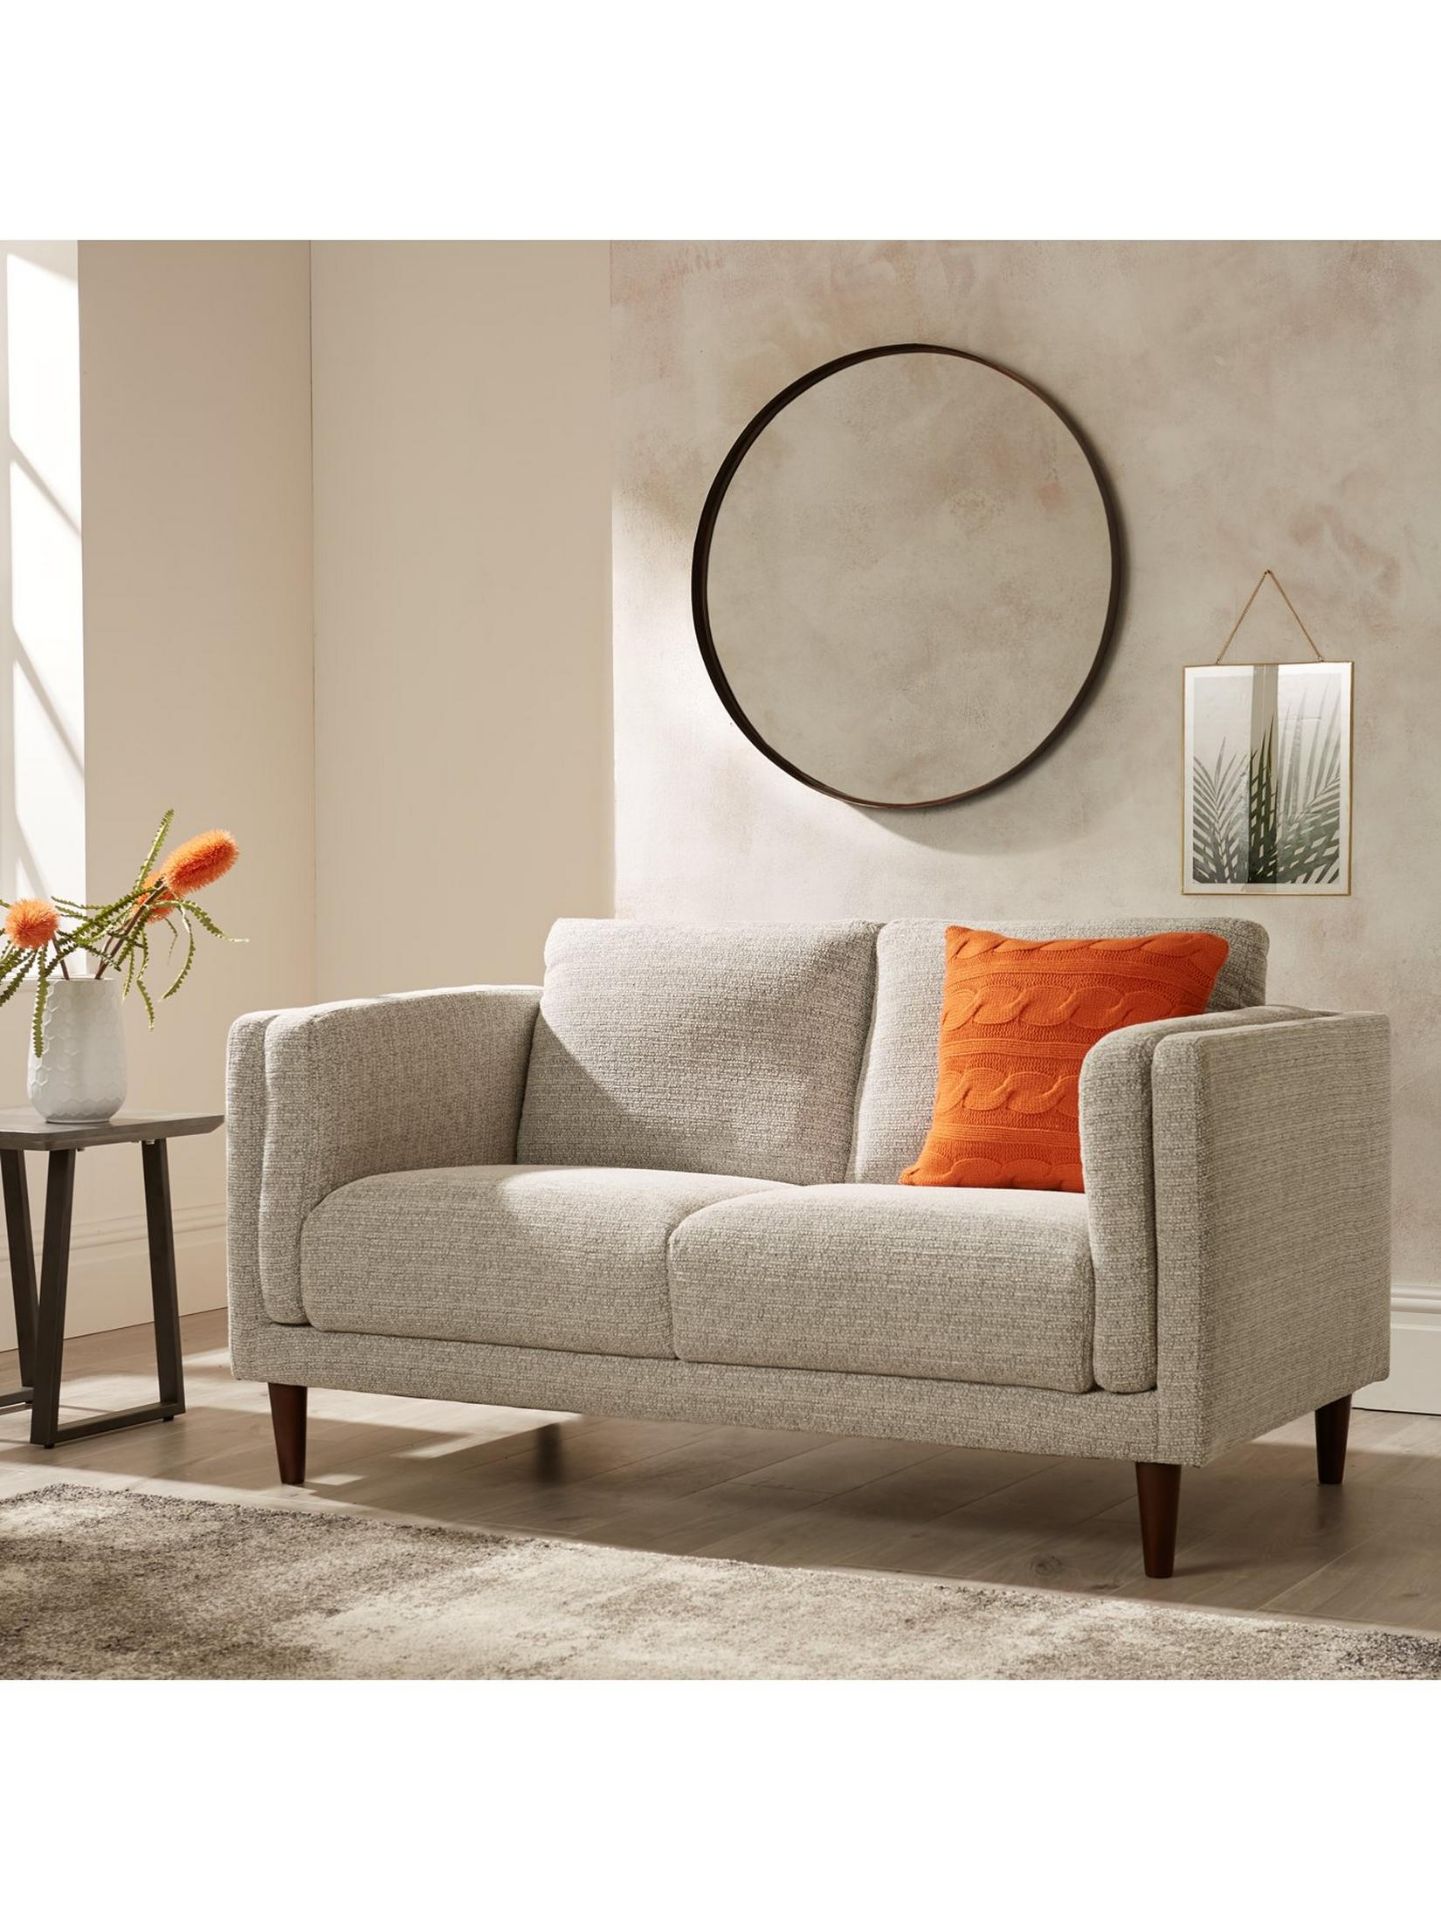 Ava 2 Seater Sofa. RPP £799.00. H 85 x W 154 x D 90 cm Modern design Ava is upholstered in a rich